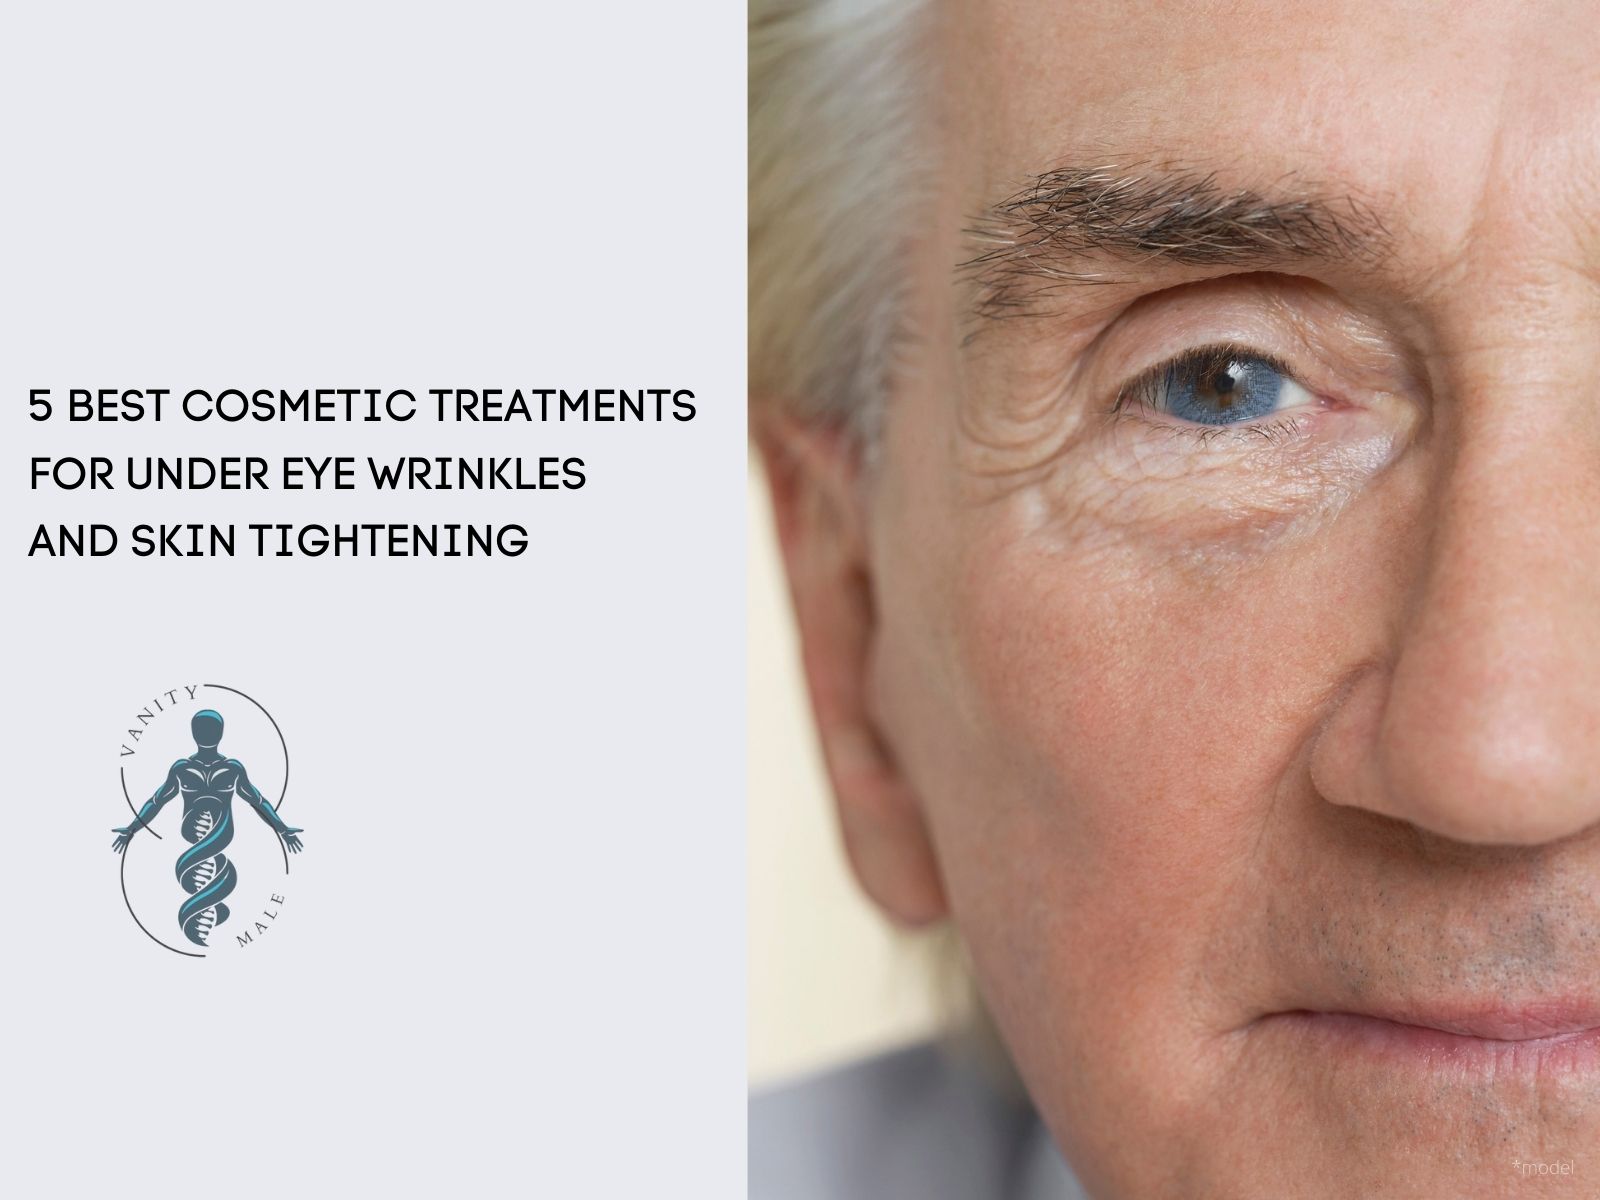 5 Best Cosmetic Treatments for Under Eye Wrinkles and Skin Tightening